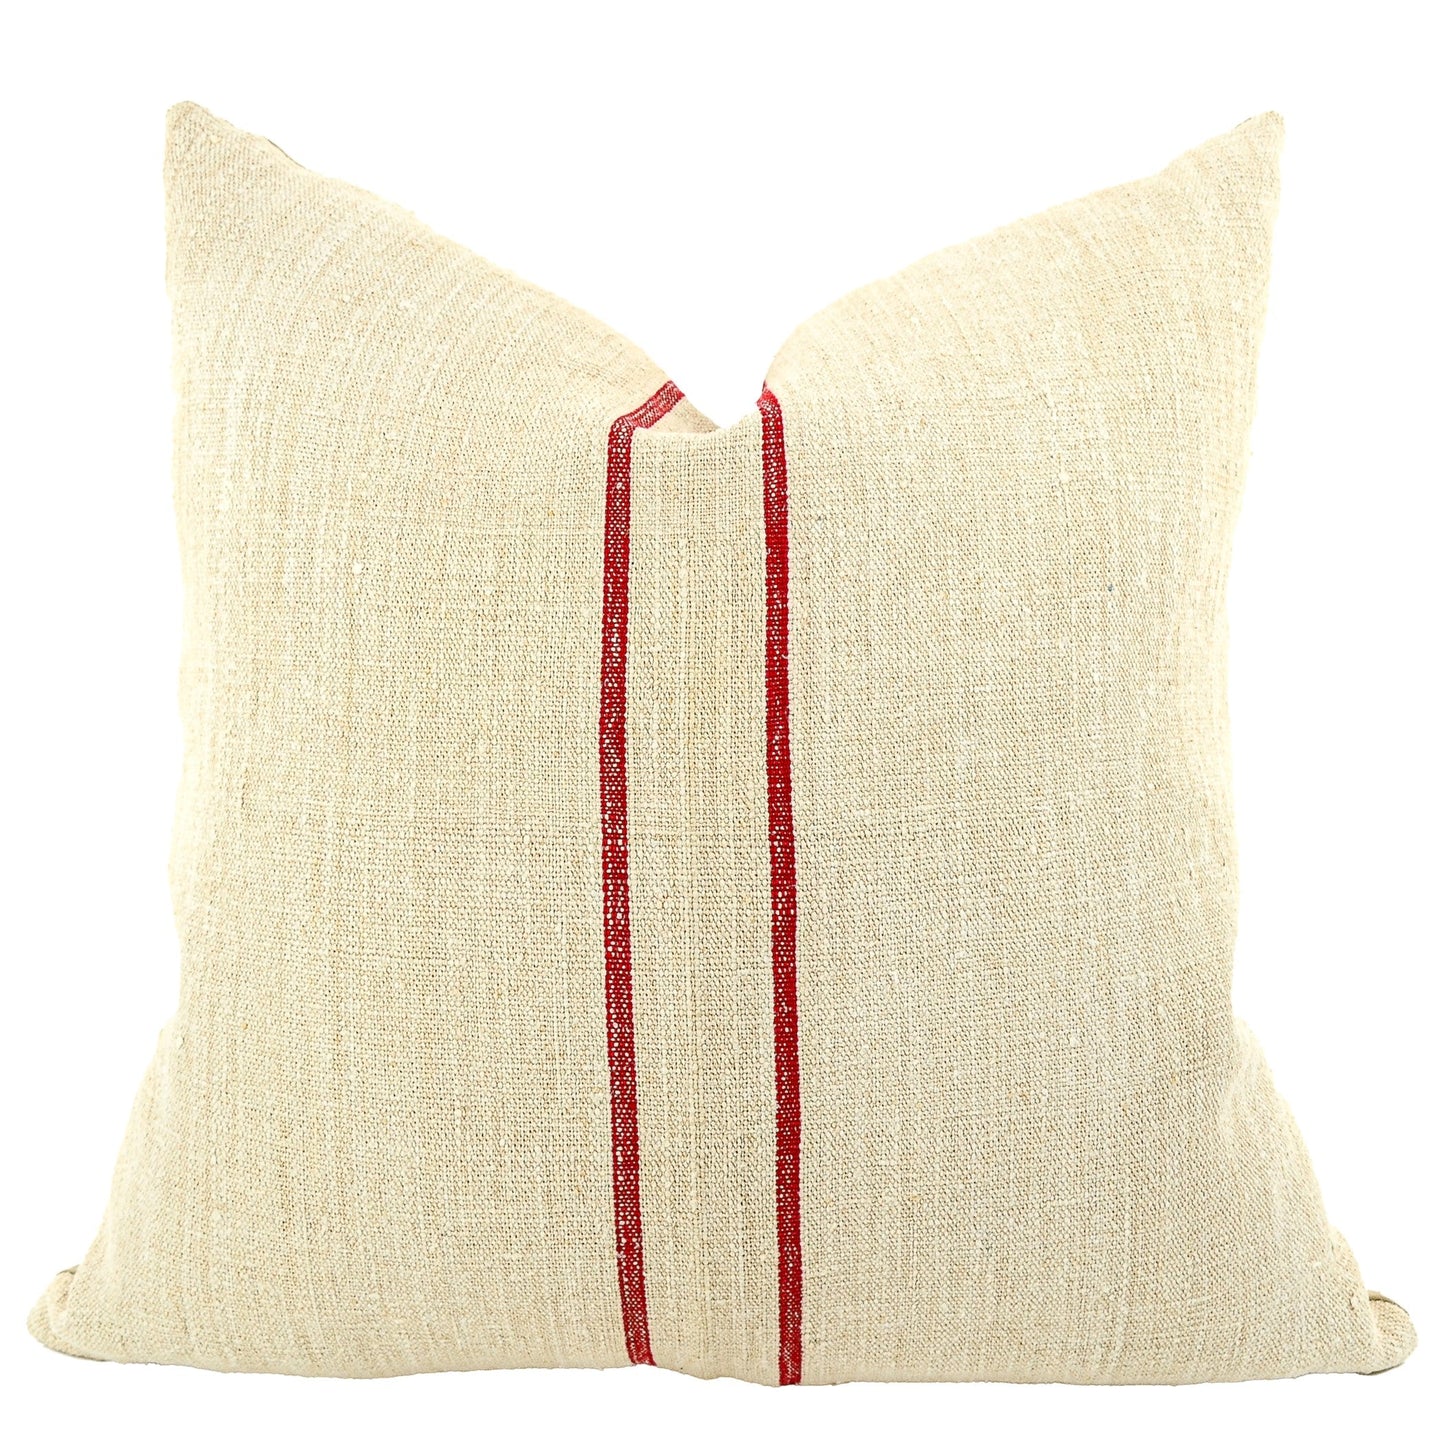 Front of pillow made from antique European grain sack natural tone linen with red vertical stripes in the middle of the pillow